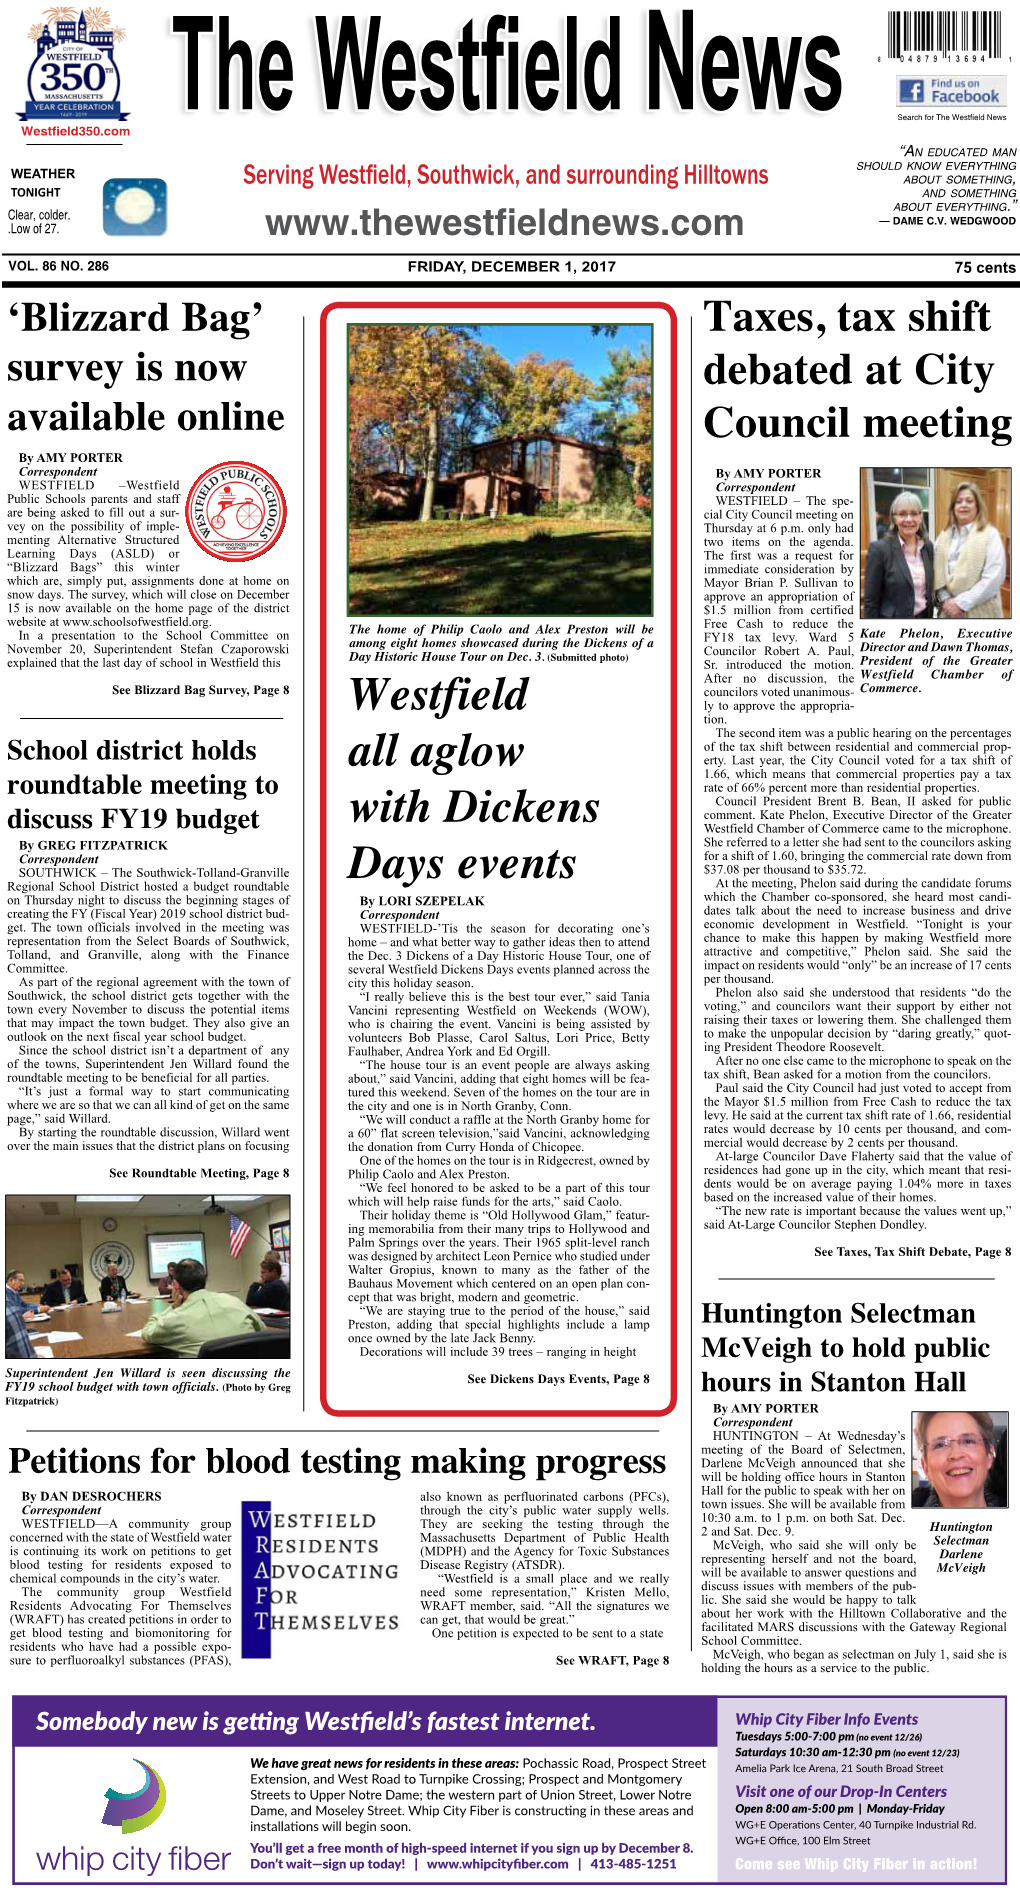 Westfield All Aglow with Dickens Days Events